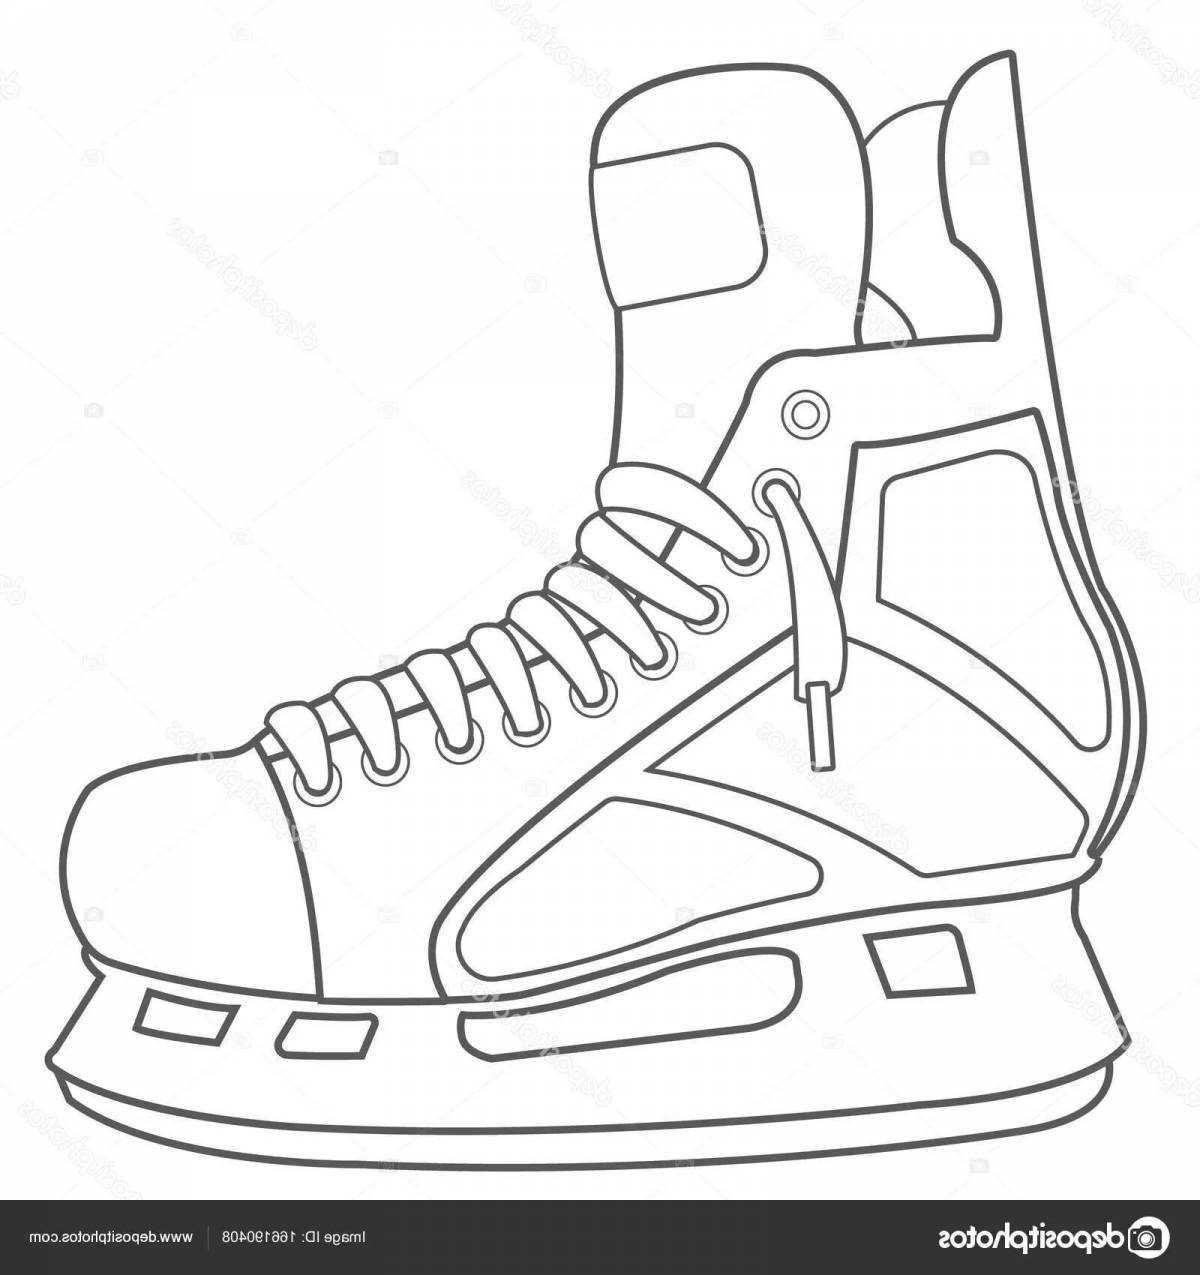 Coloring page friendly skate